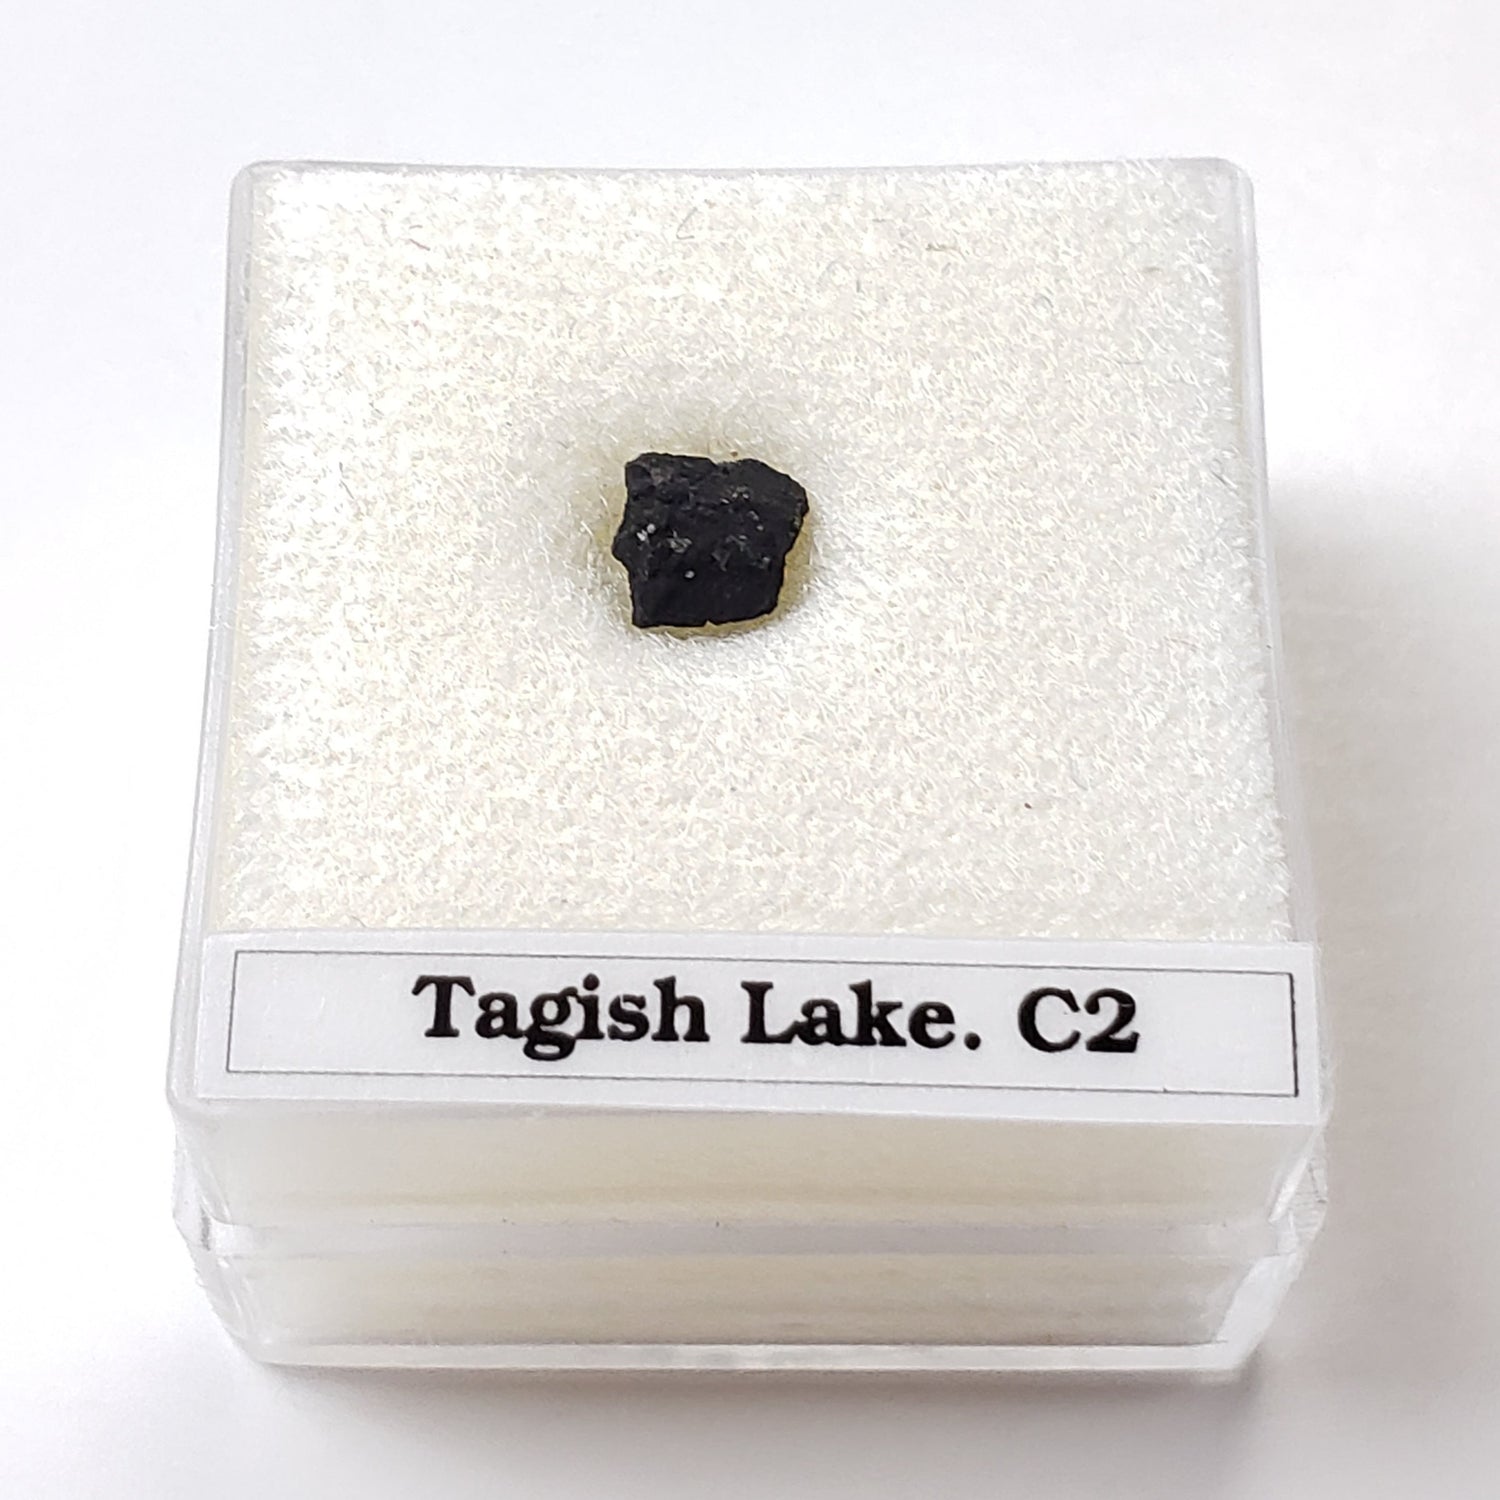 Tagish Lake Meteorite | 41 mg | Fragment | C2-ung Class | Observed Fall 2000 Canada